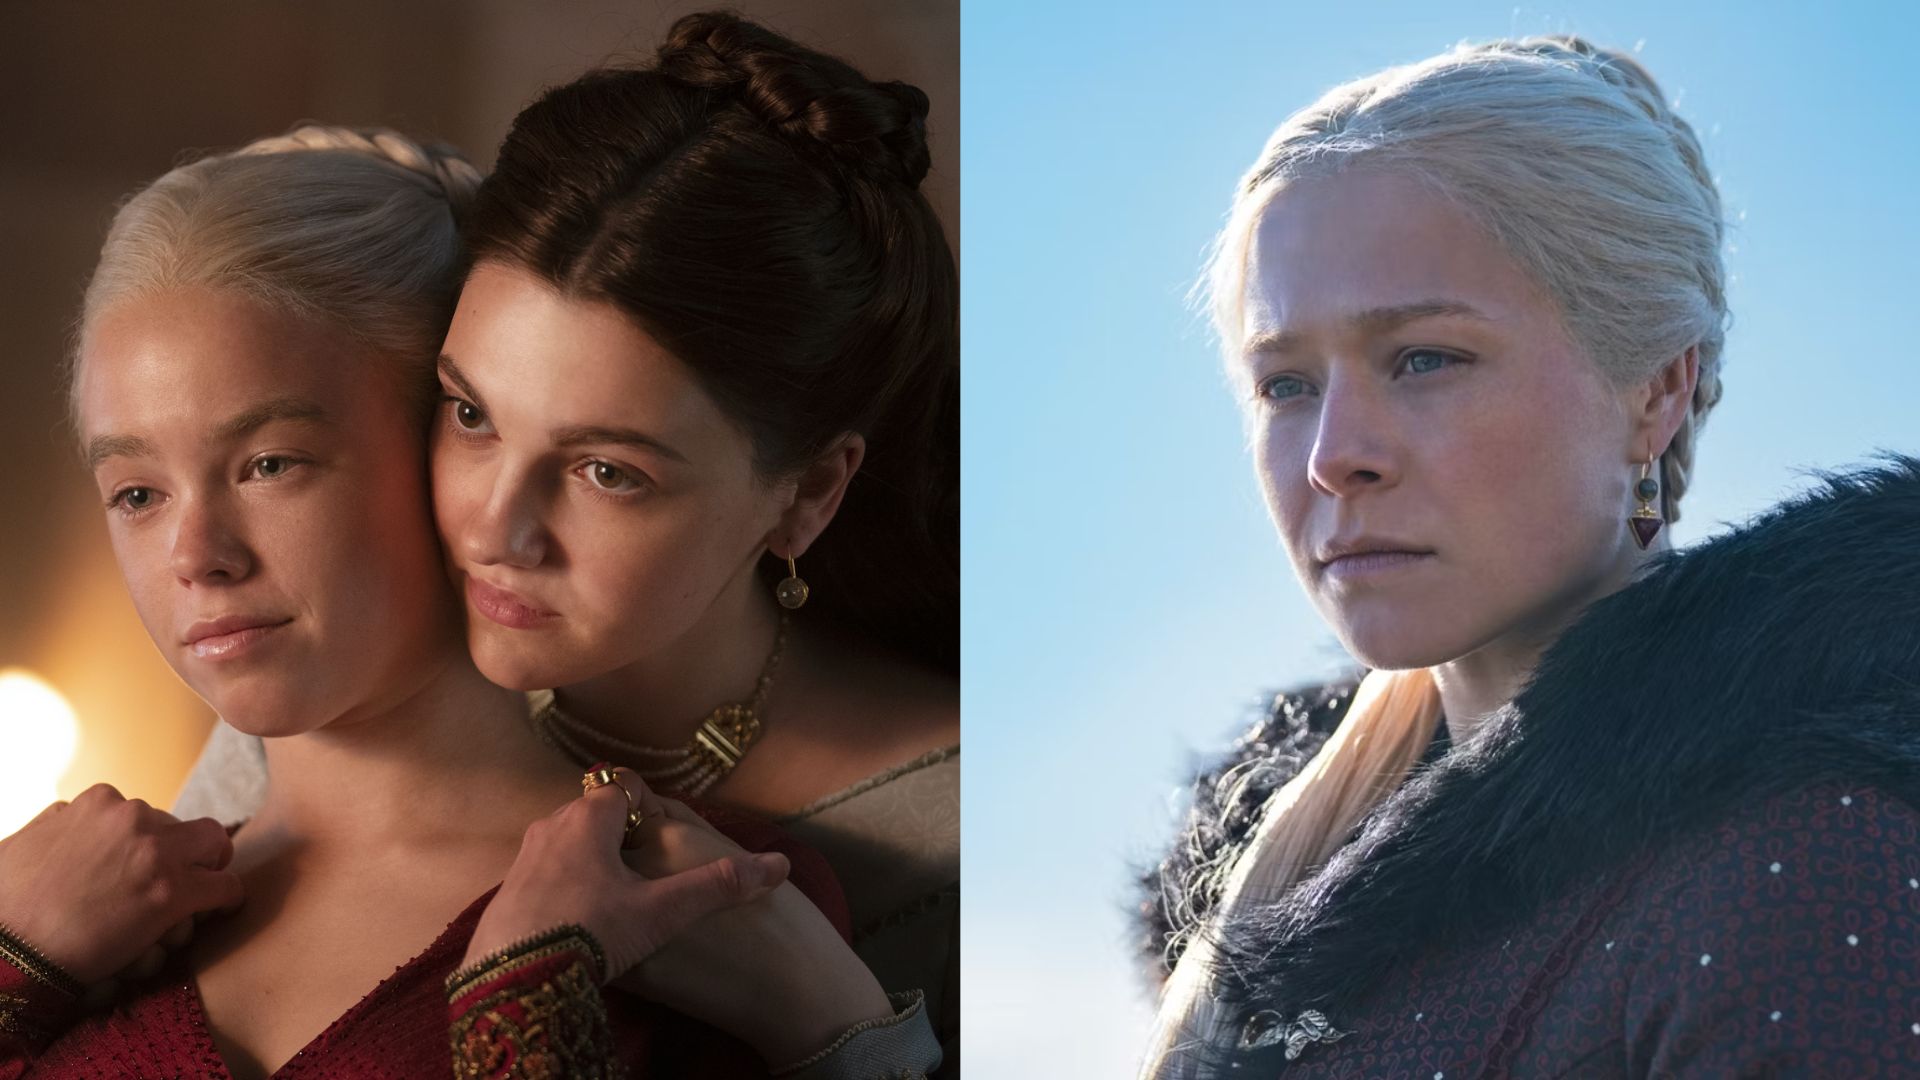 ‘House Of The Dragon’ Writer Says Show Wont Have “Sexual Violence” Like ‘Game Of Thrones’ Did